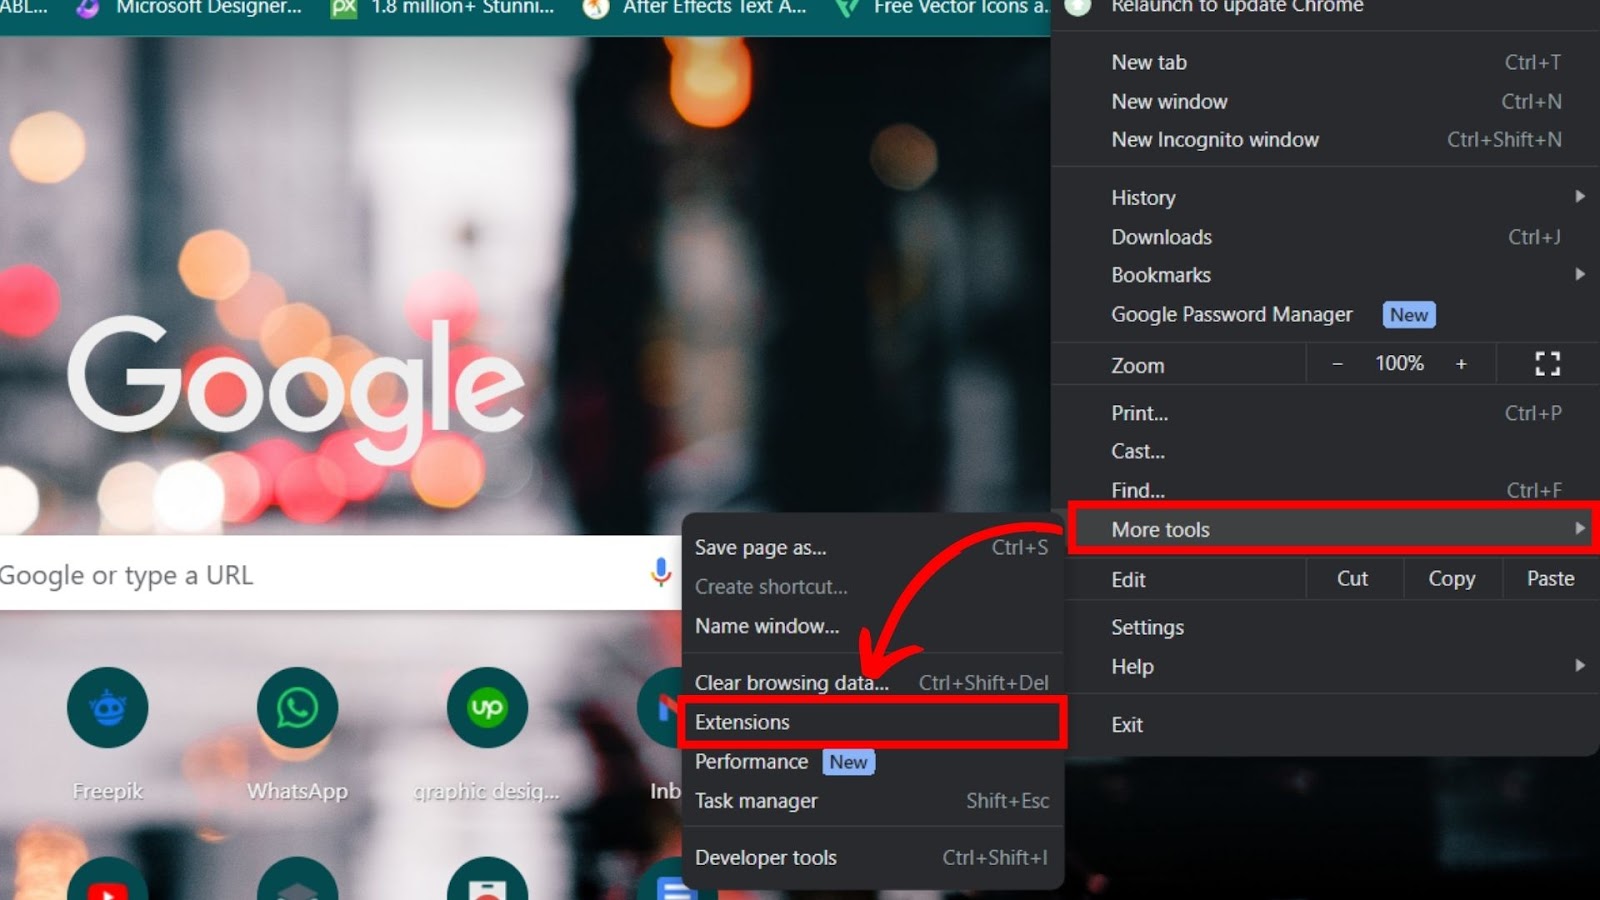 How to Access the Extensions Page on Chromebook